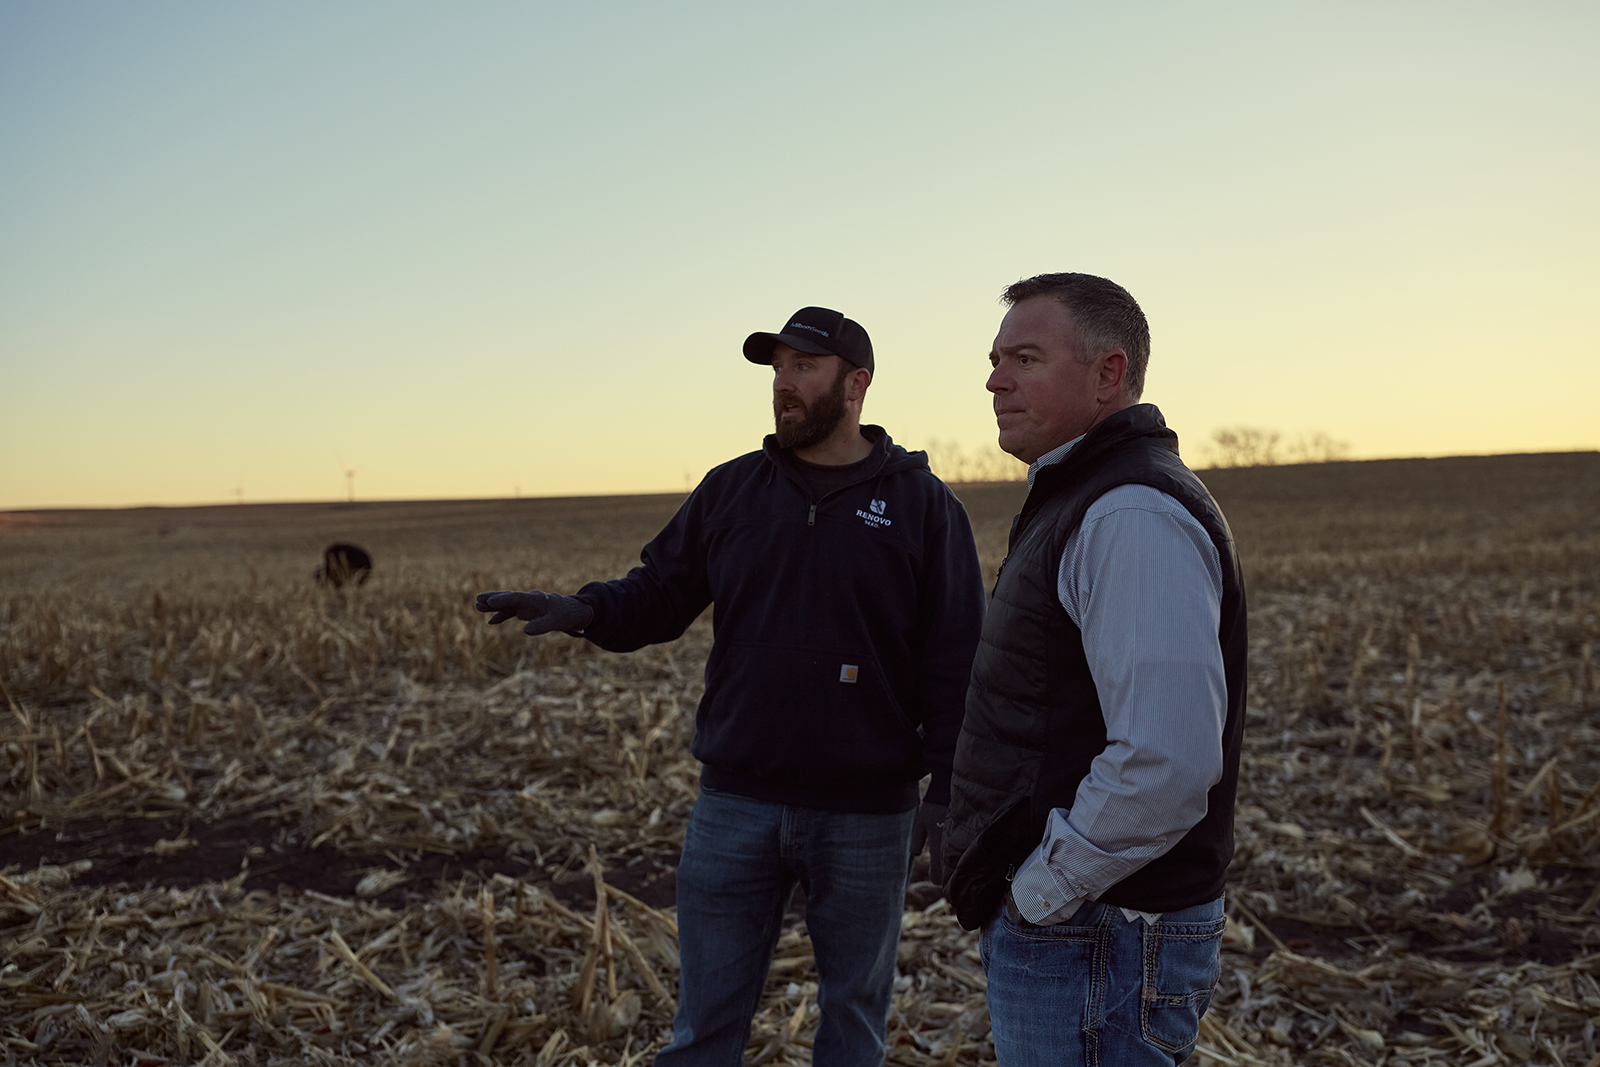 Ryan Eichler meets with a farmer and rancher in Minnesota, where they discuss how The SustainAg Network's programs could help him improve his on-farm grazing potential.